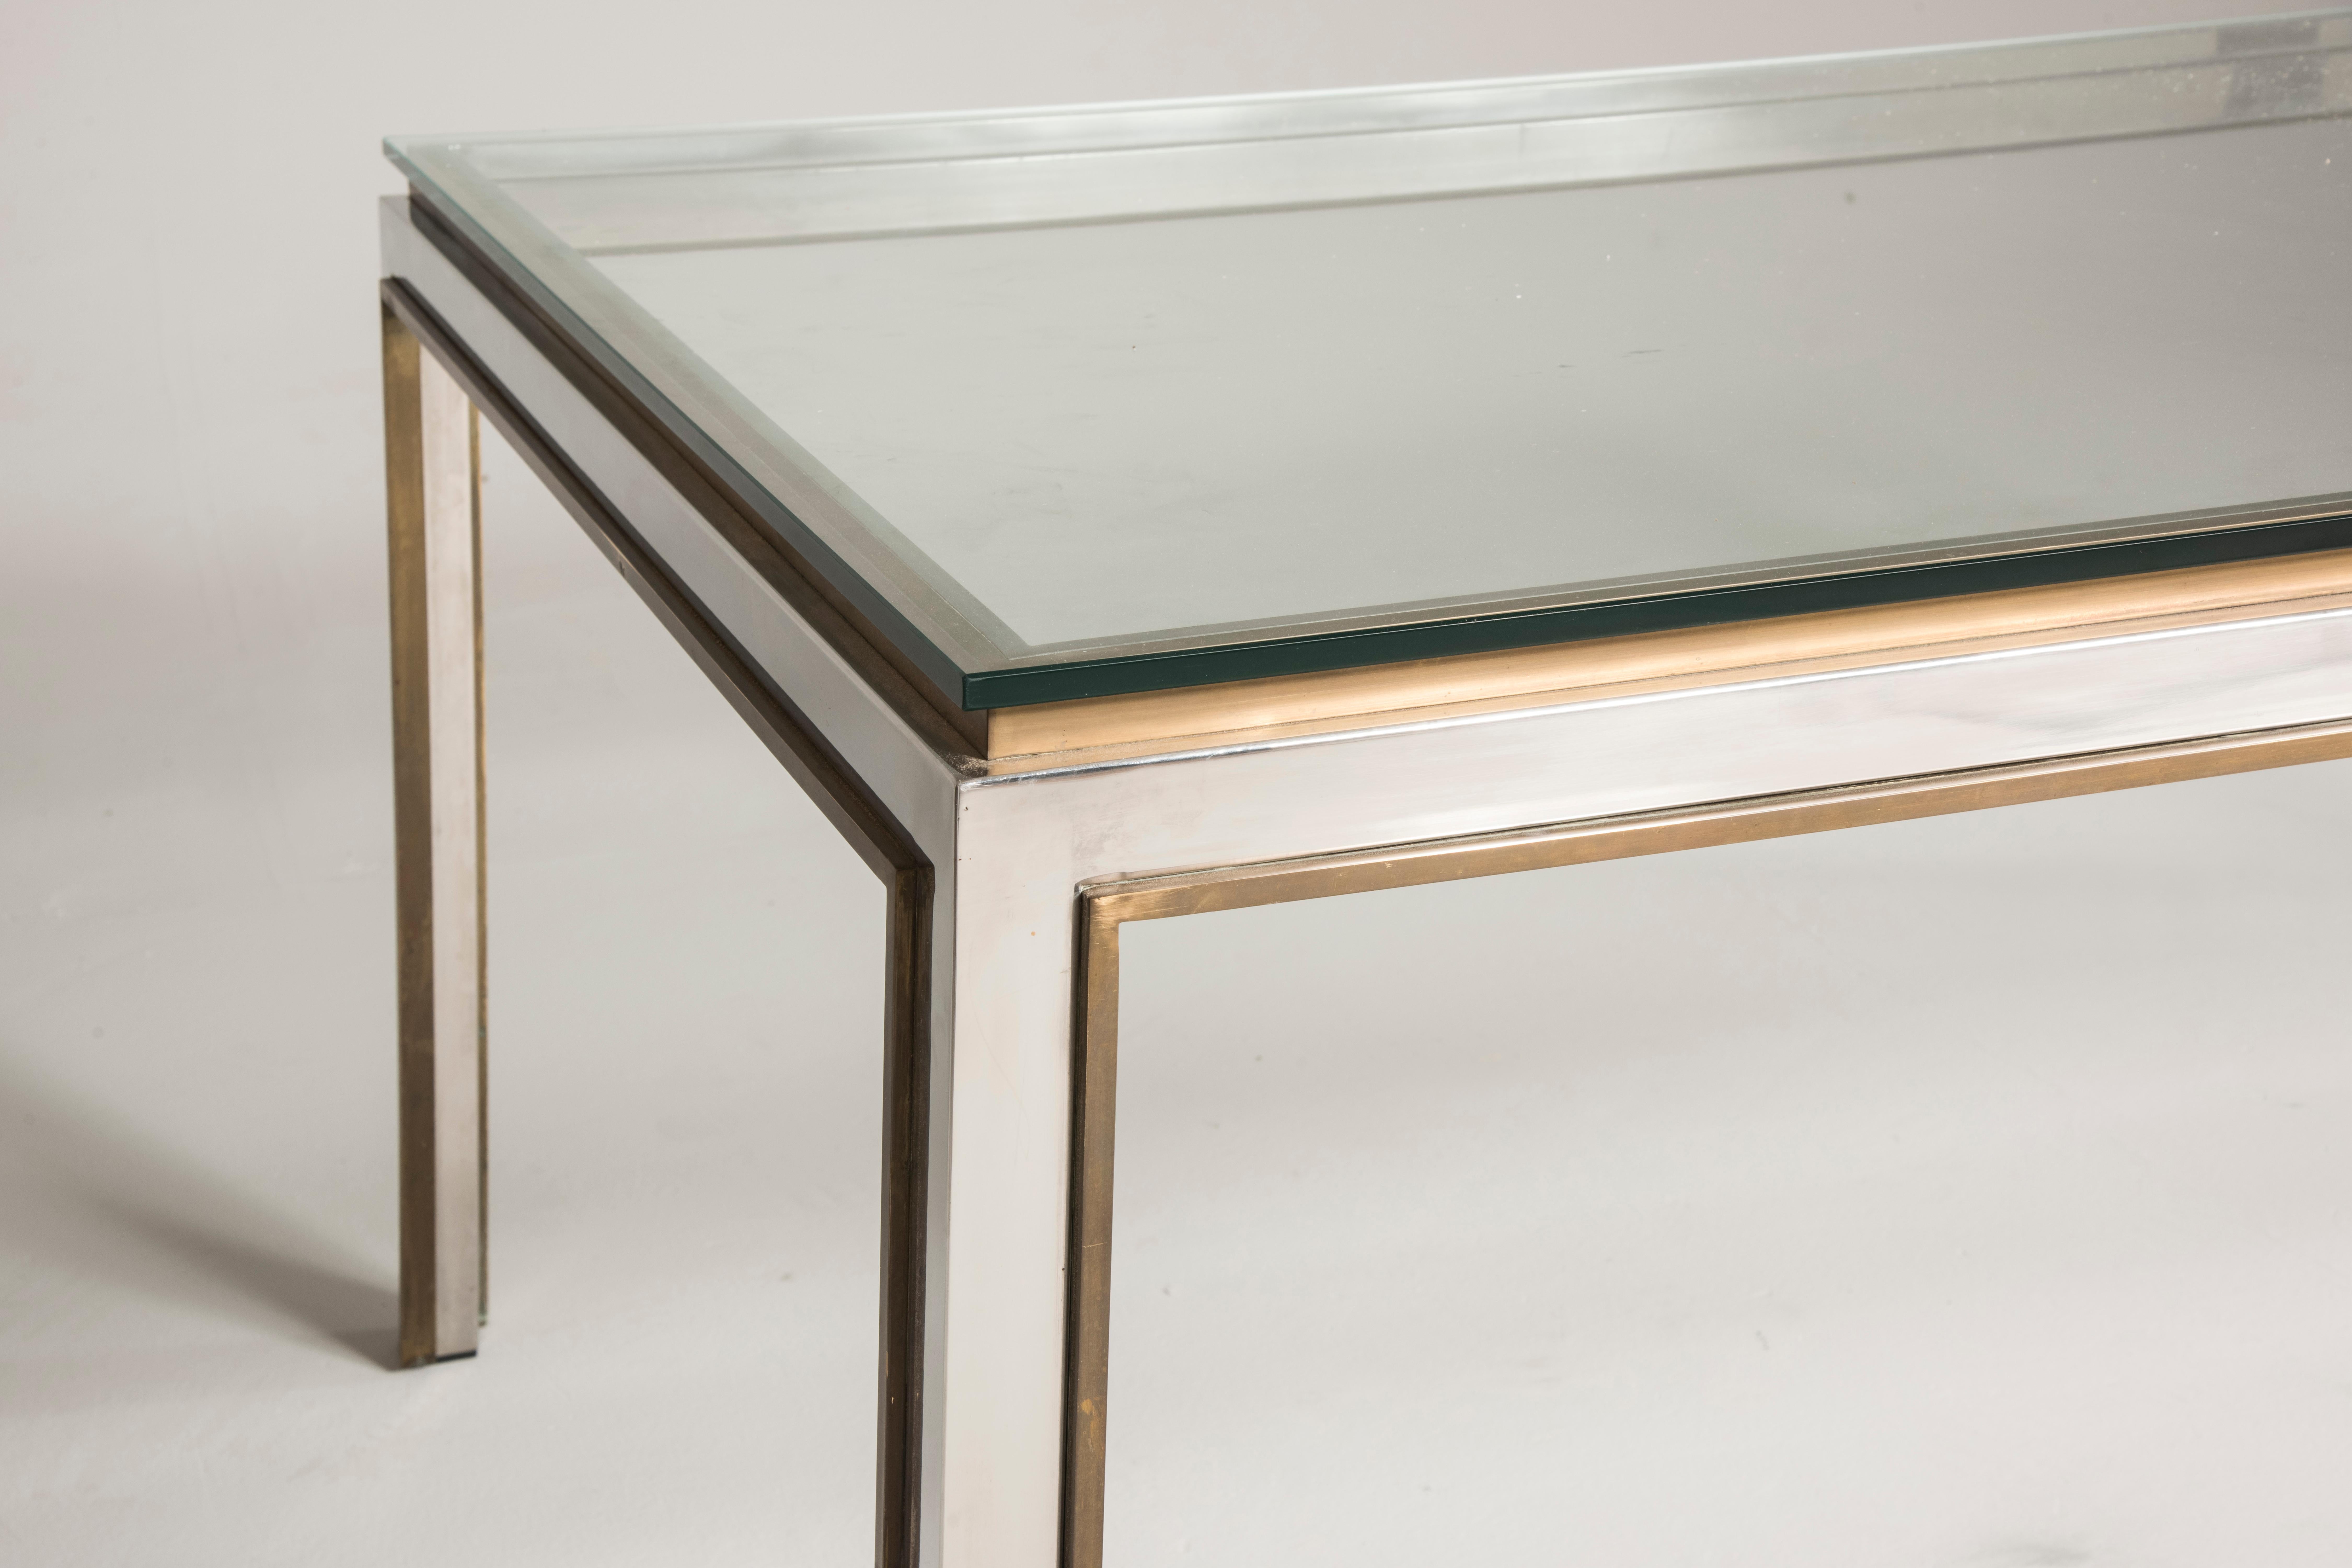 Willy Rizzo Fiorentina Model Steel and Brass Crystal Top Table, 1970s For Sale 2